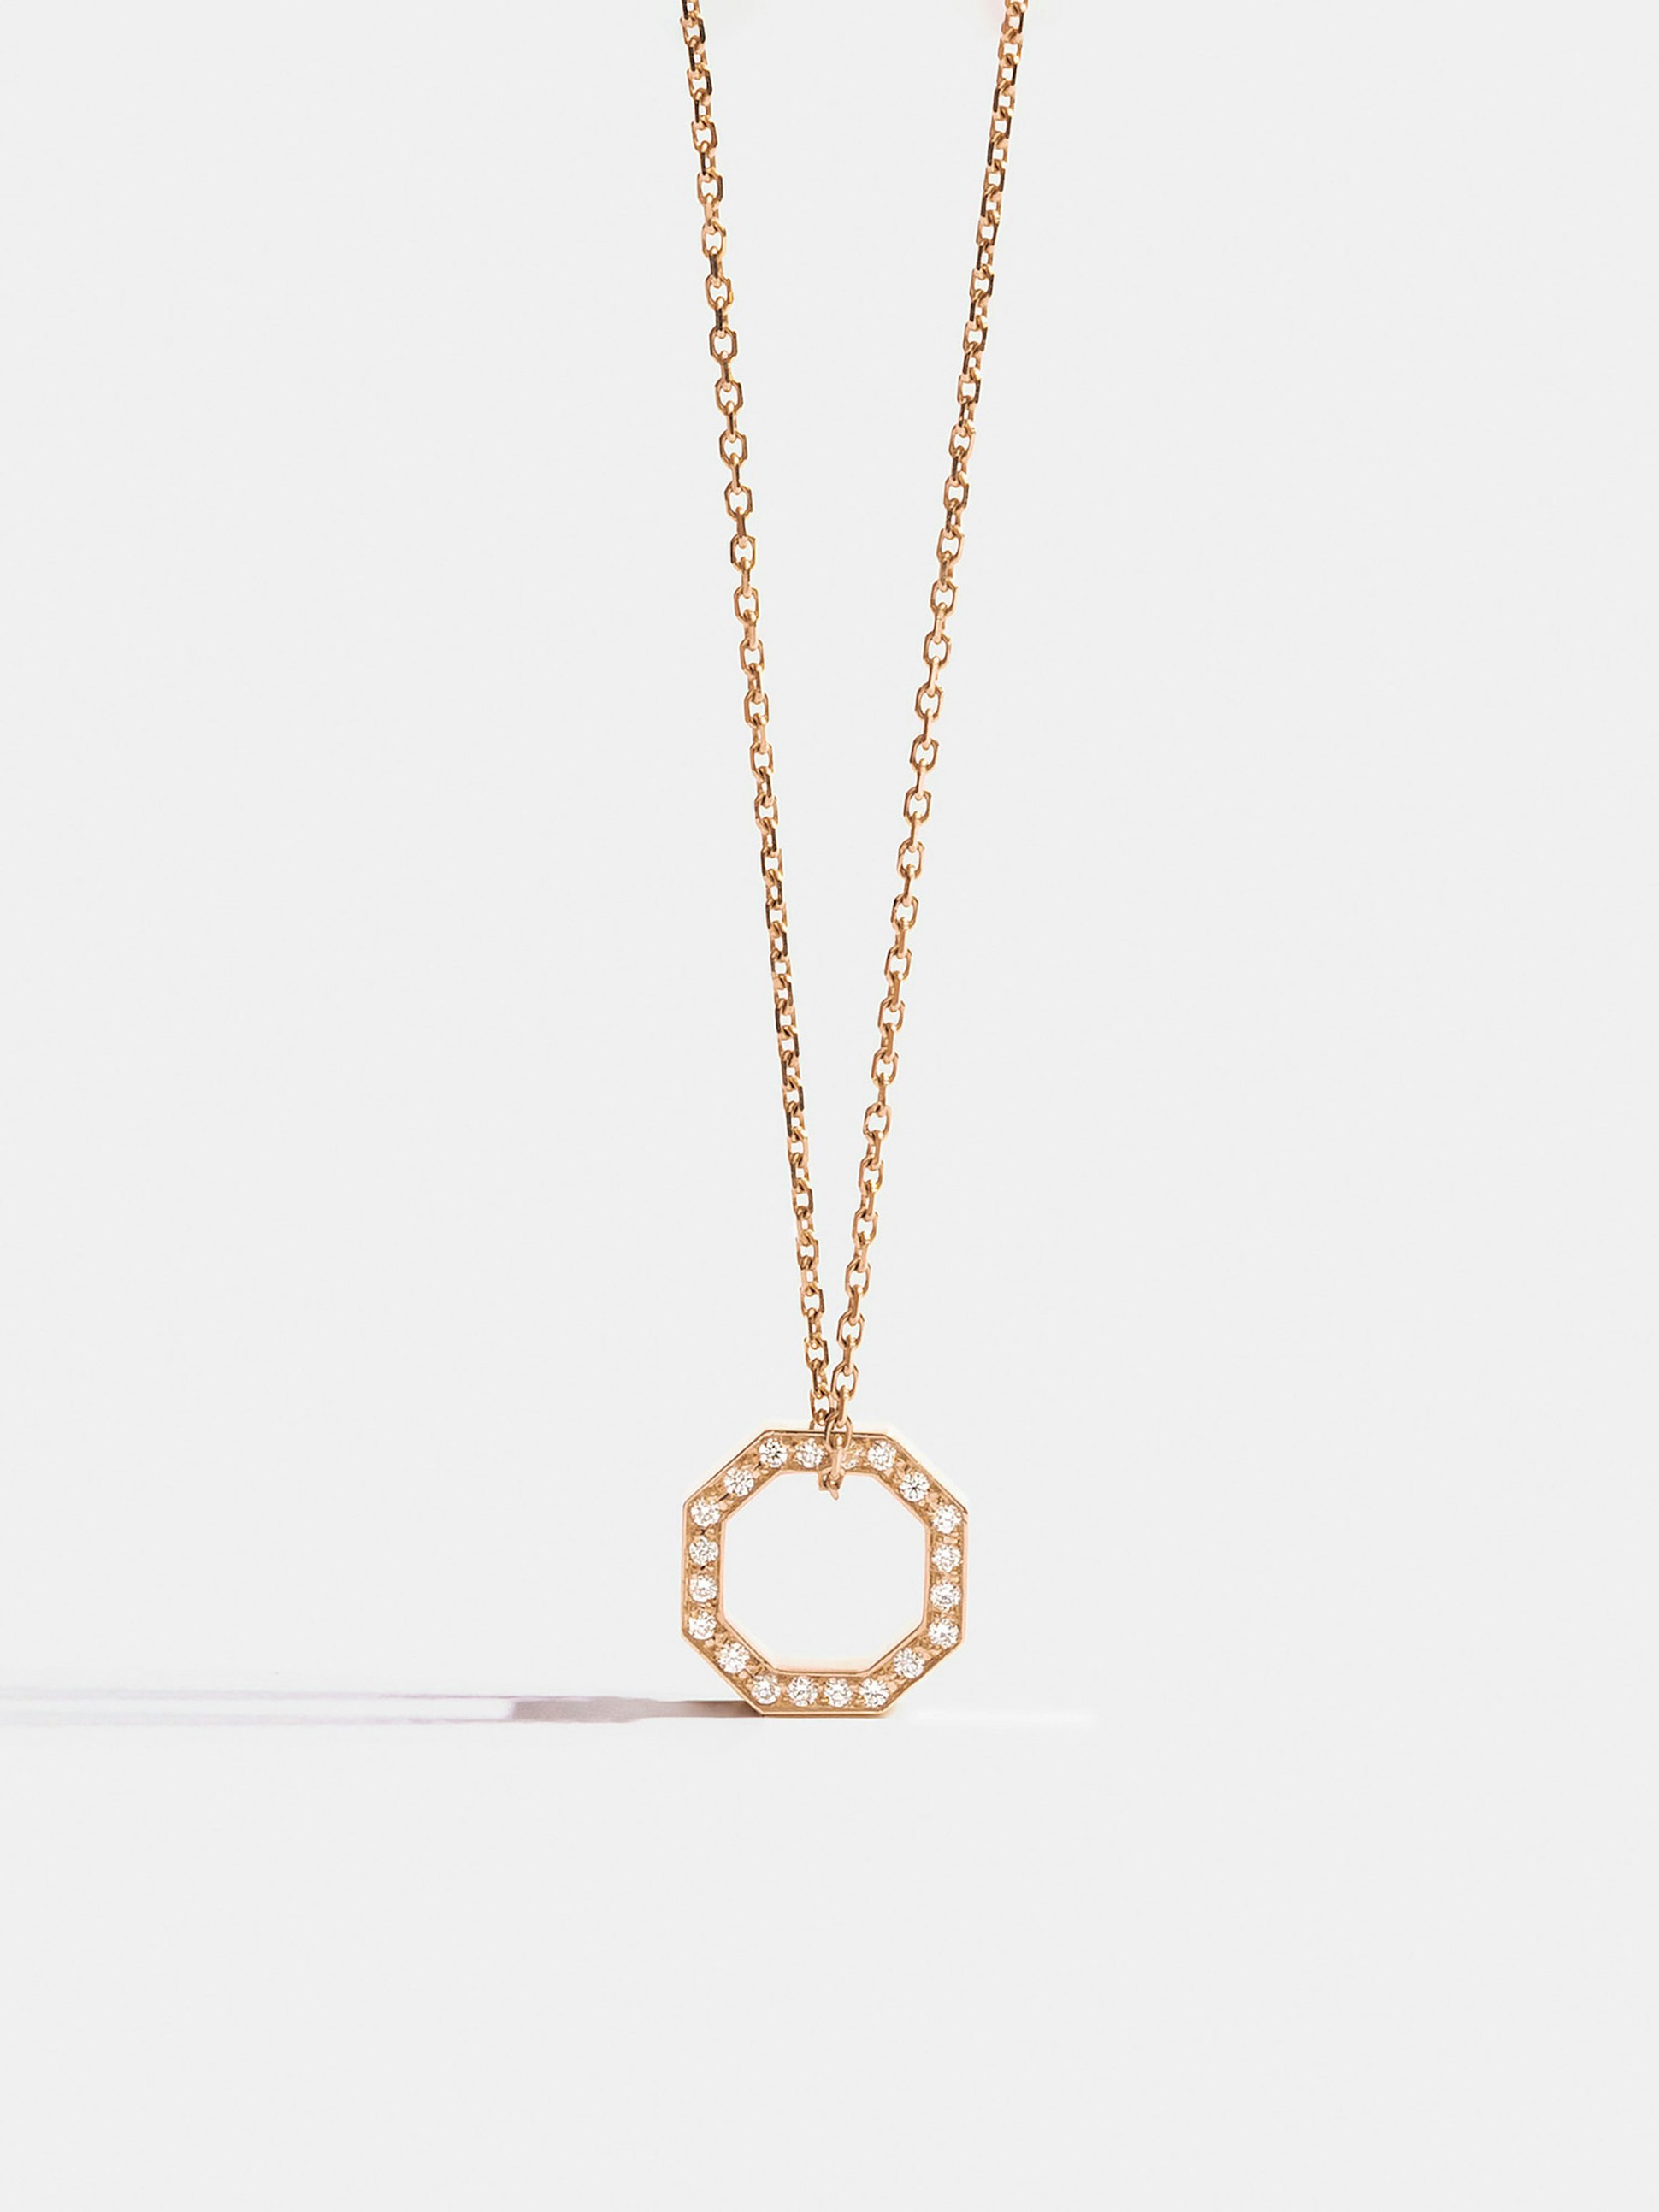 Octogone 10mm pendant in 18k Fairmined ethical rose gold, paved with lab-grown diamonds, on a chain.